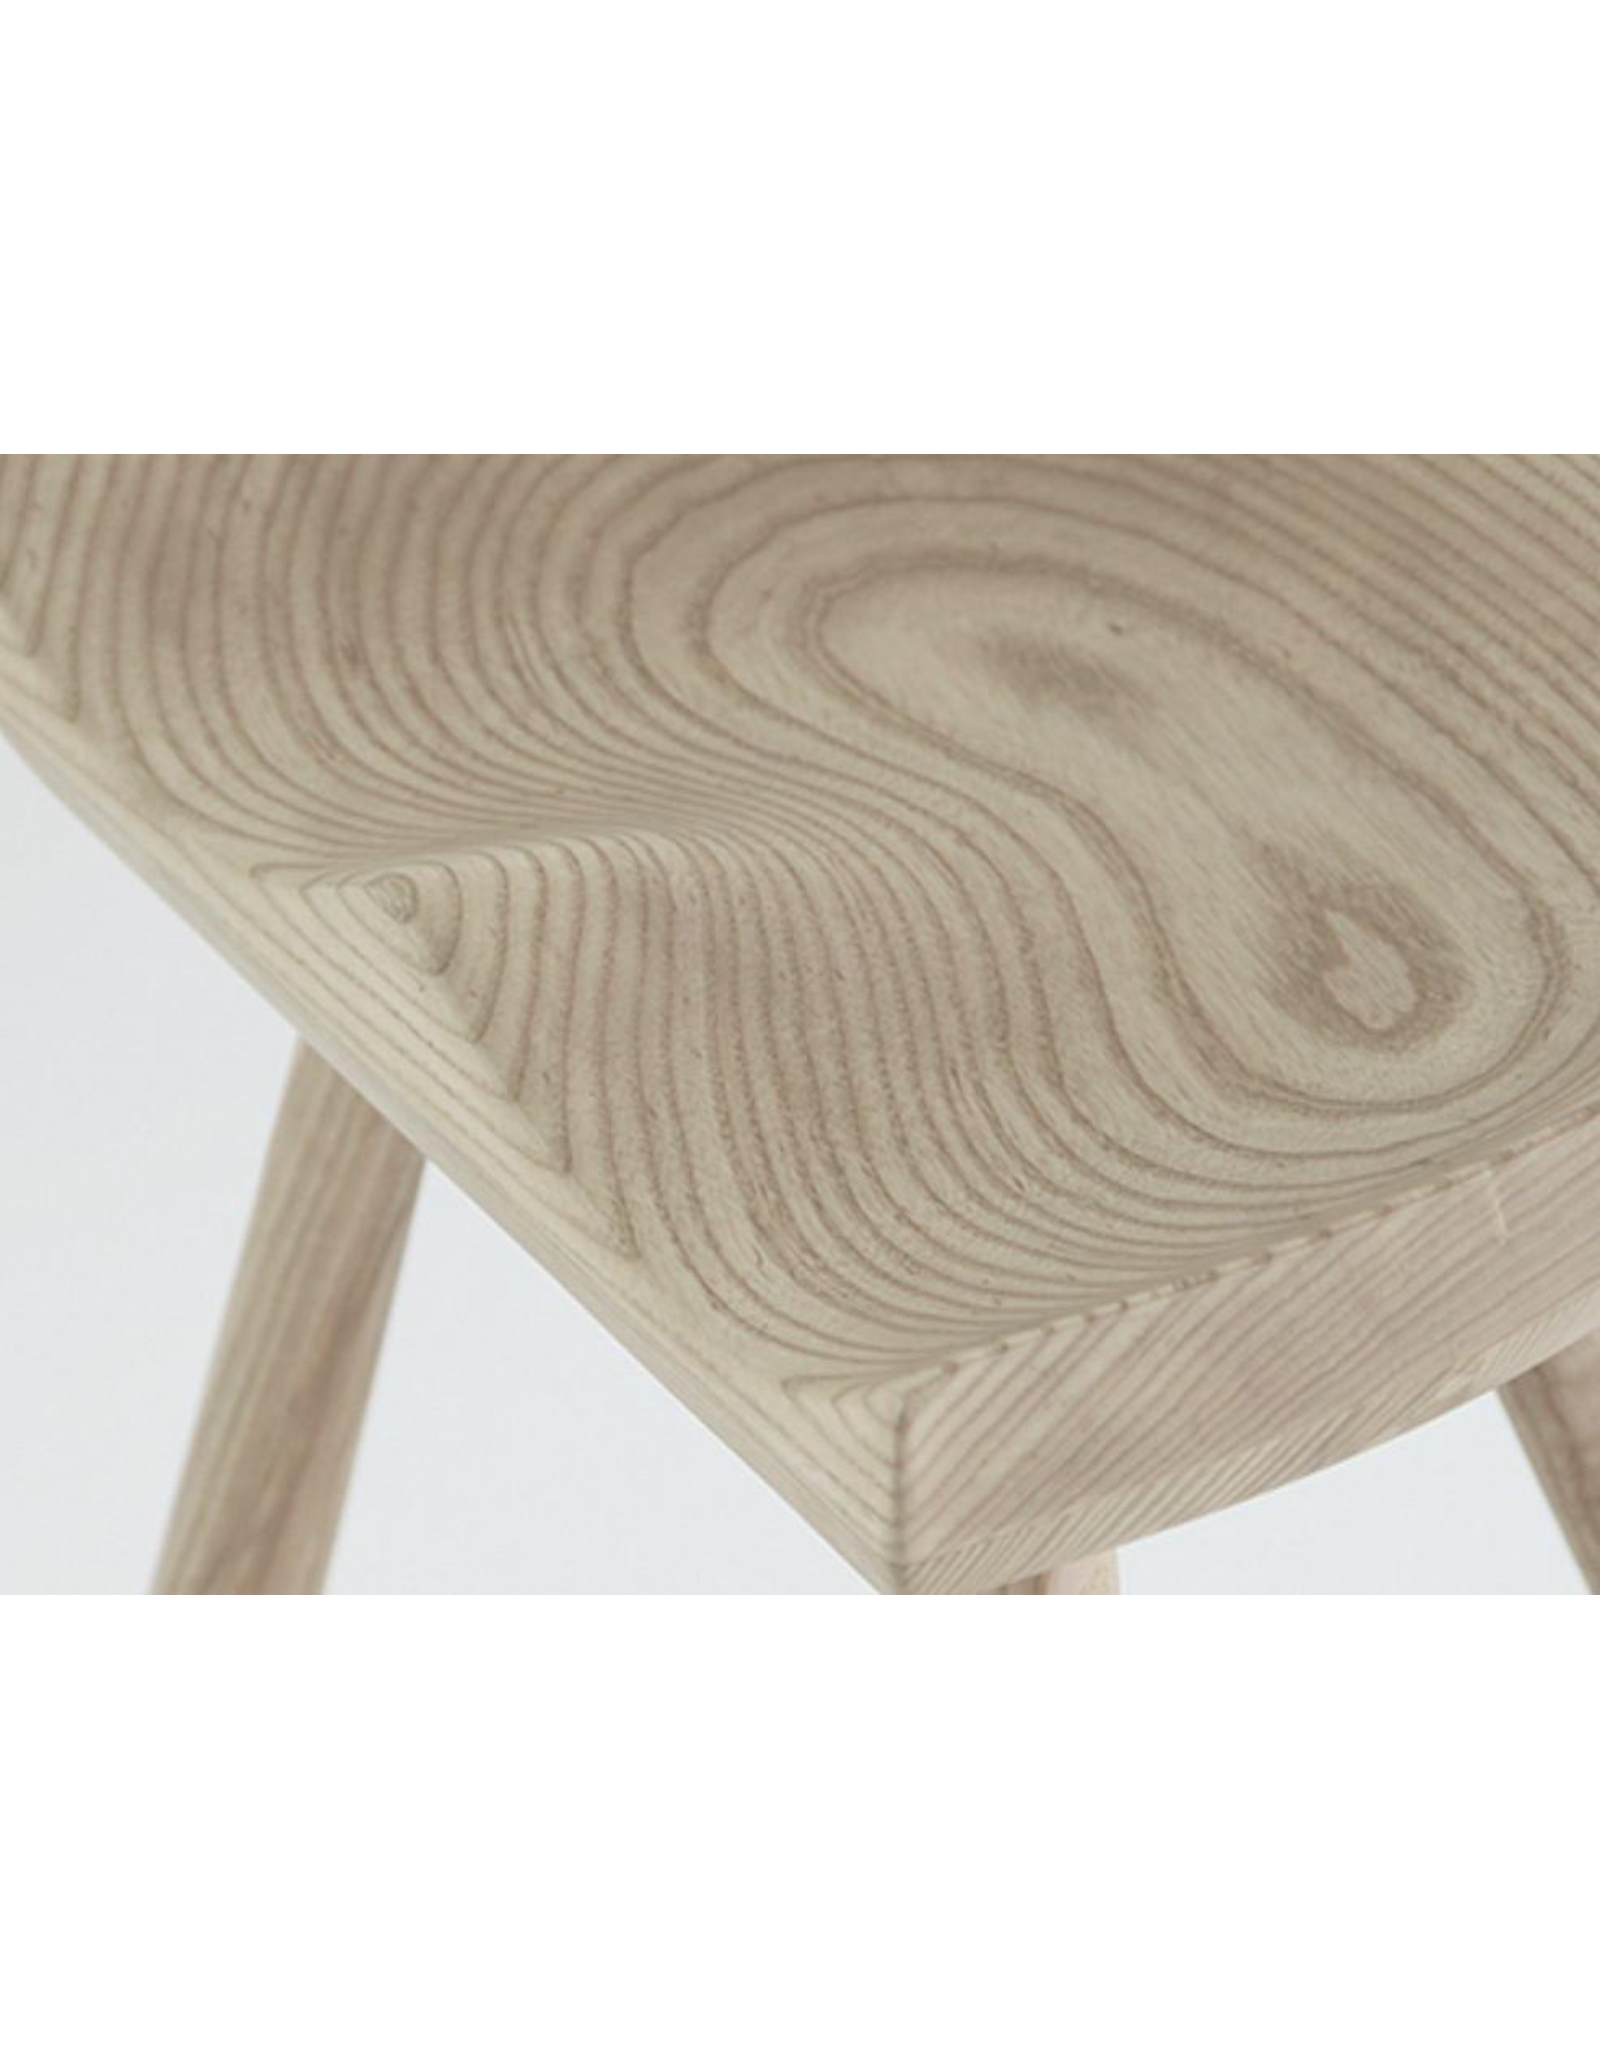 THE SHOEMAKER CHAIR IN 69CM HEIGHT, BEECH WHITE OILED FINISH